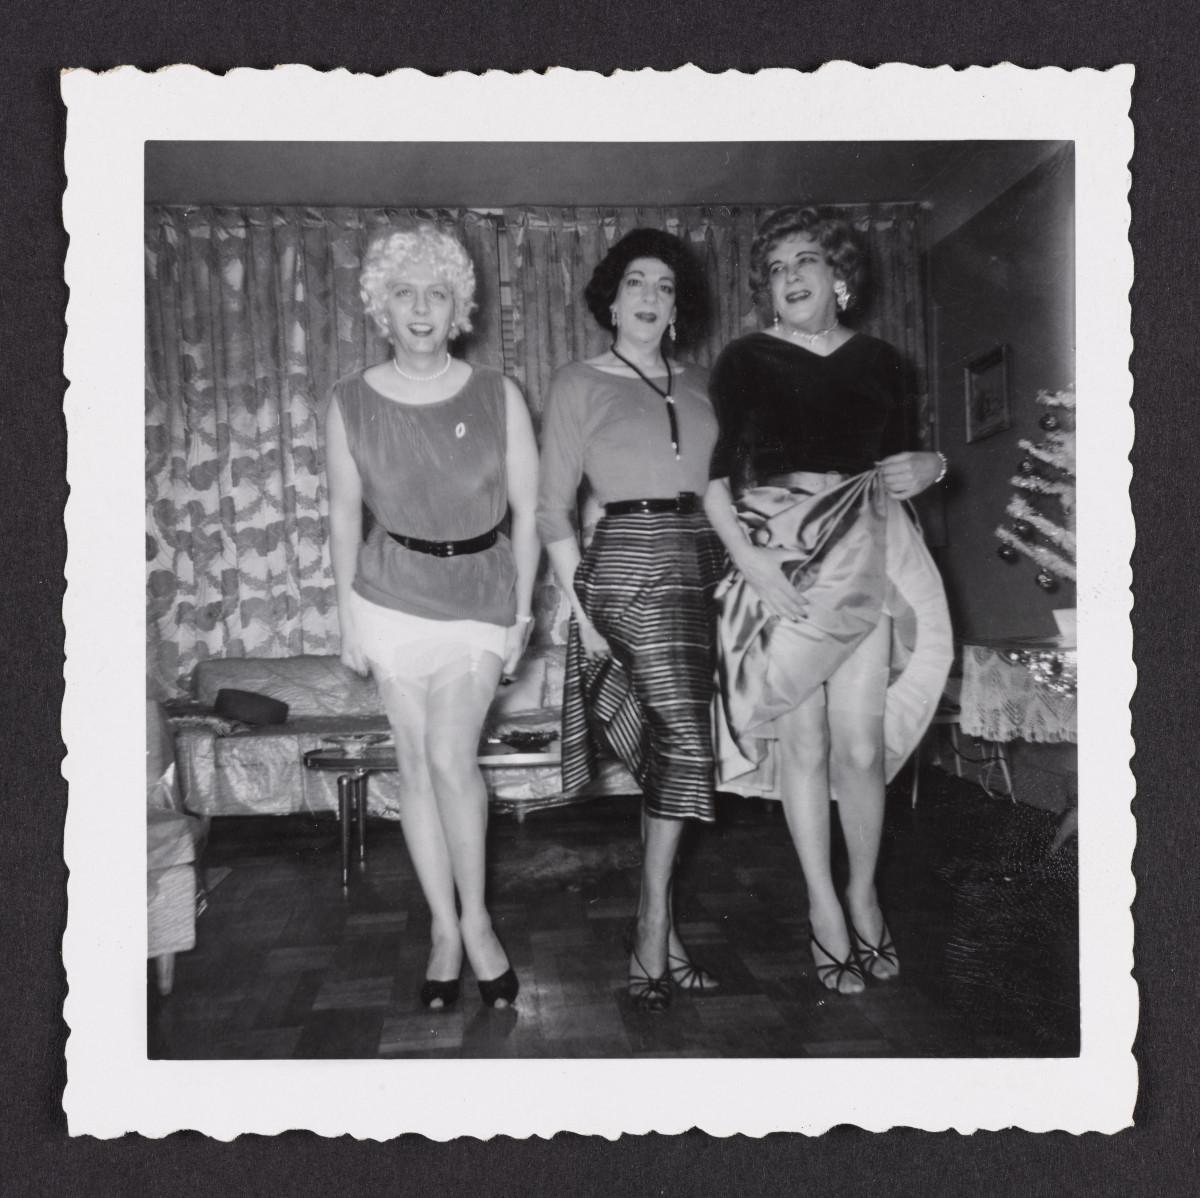 Unknown American. Susanna and two friends showing some leg, gelatin silver print, 1960s. Collection Art Gallery of Ontario. Purchase, with funds generously donated by Martha LA McCain, 2015. Photo © AGO.